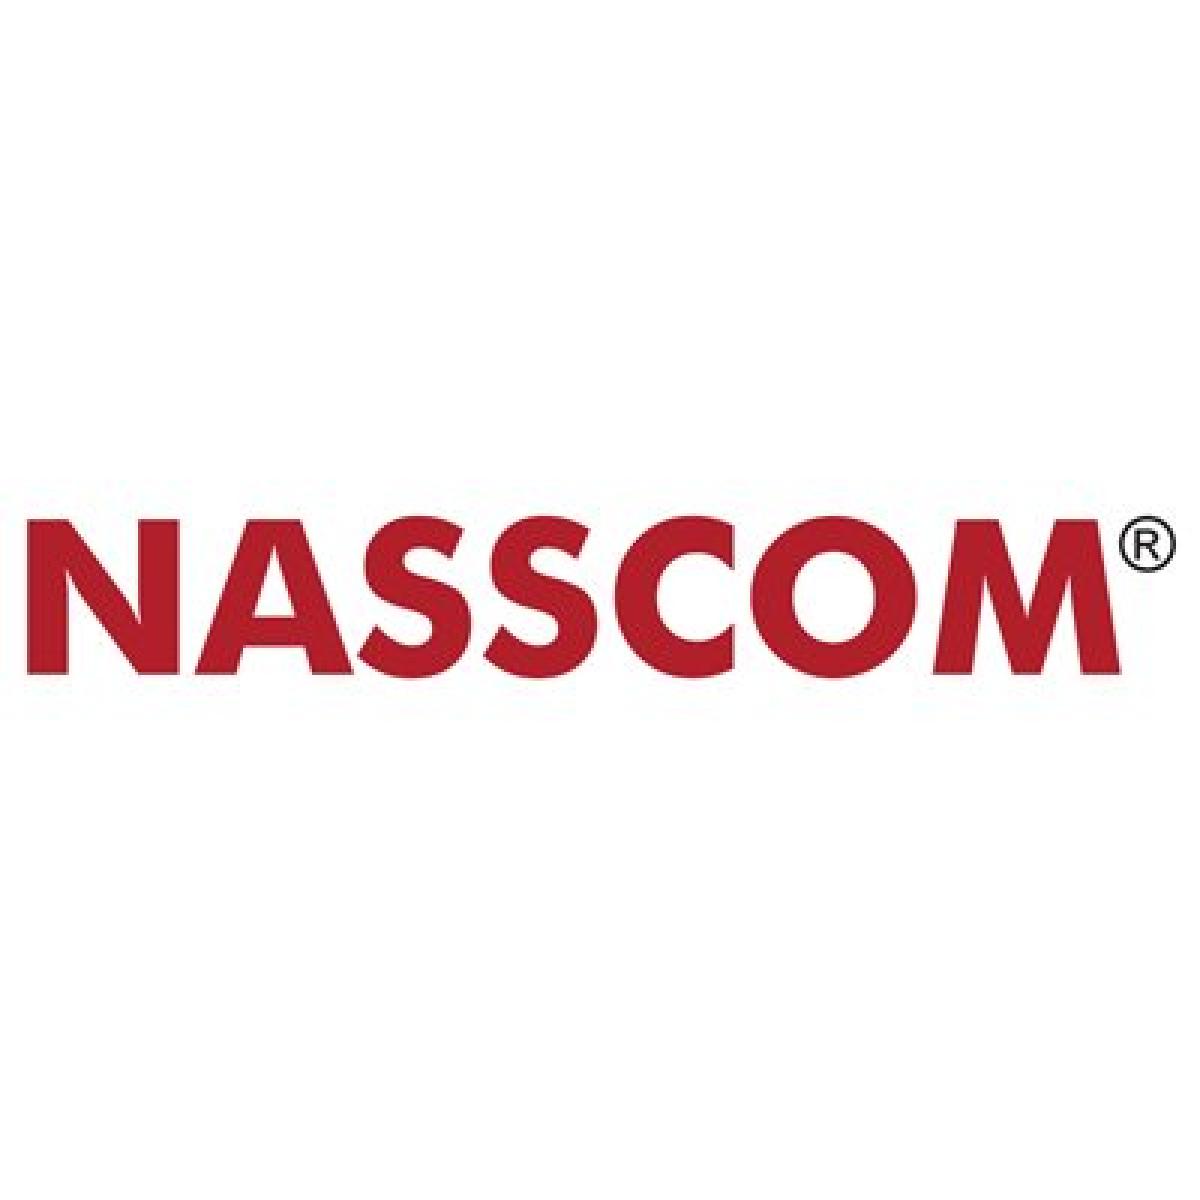 NASSCOM collaborates with Investment NSW